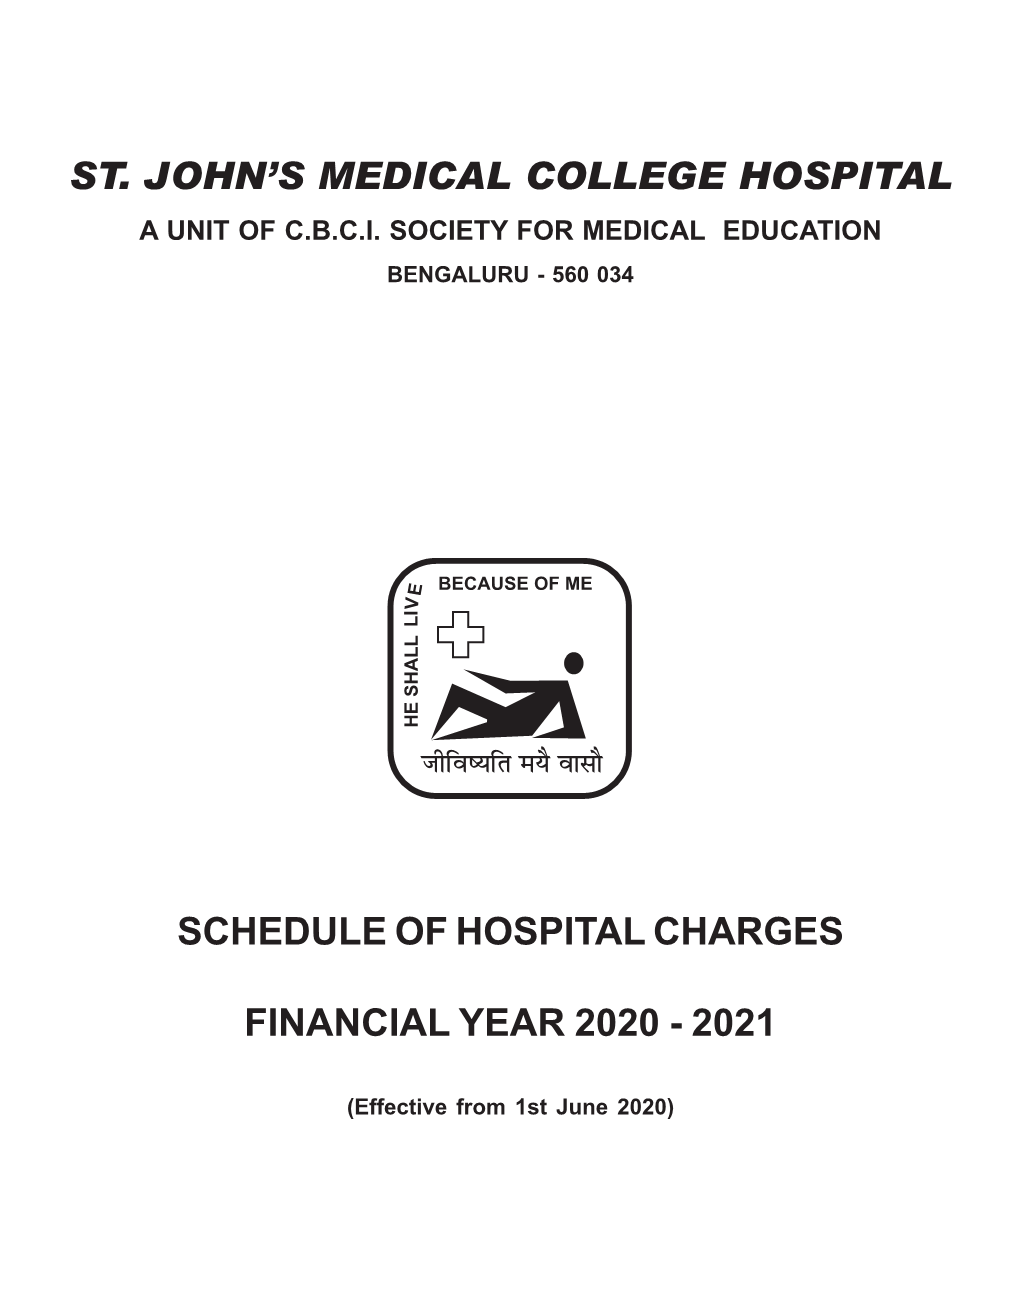 St. Johns Hospital Charges 2020-2021